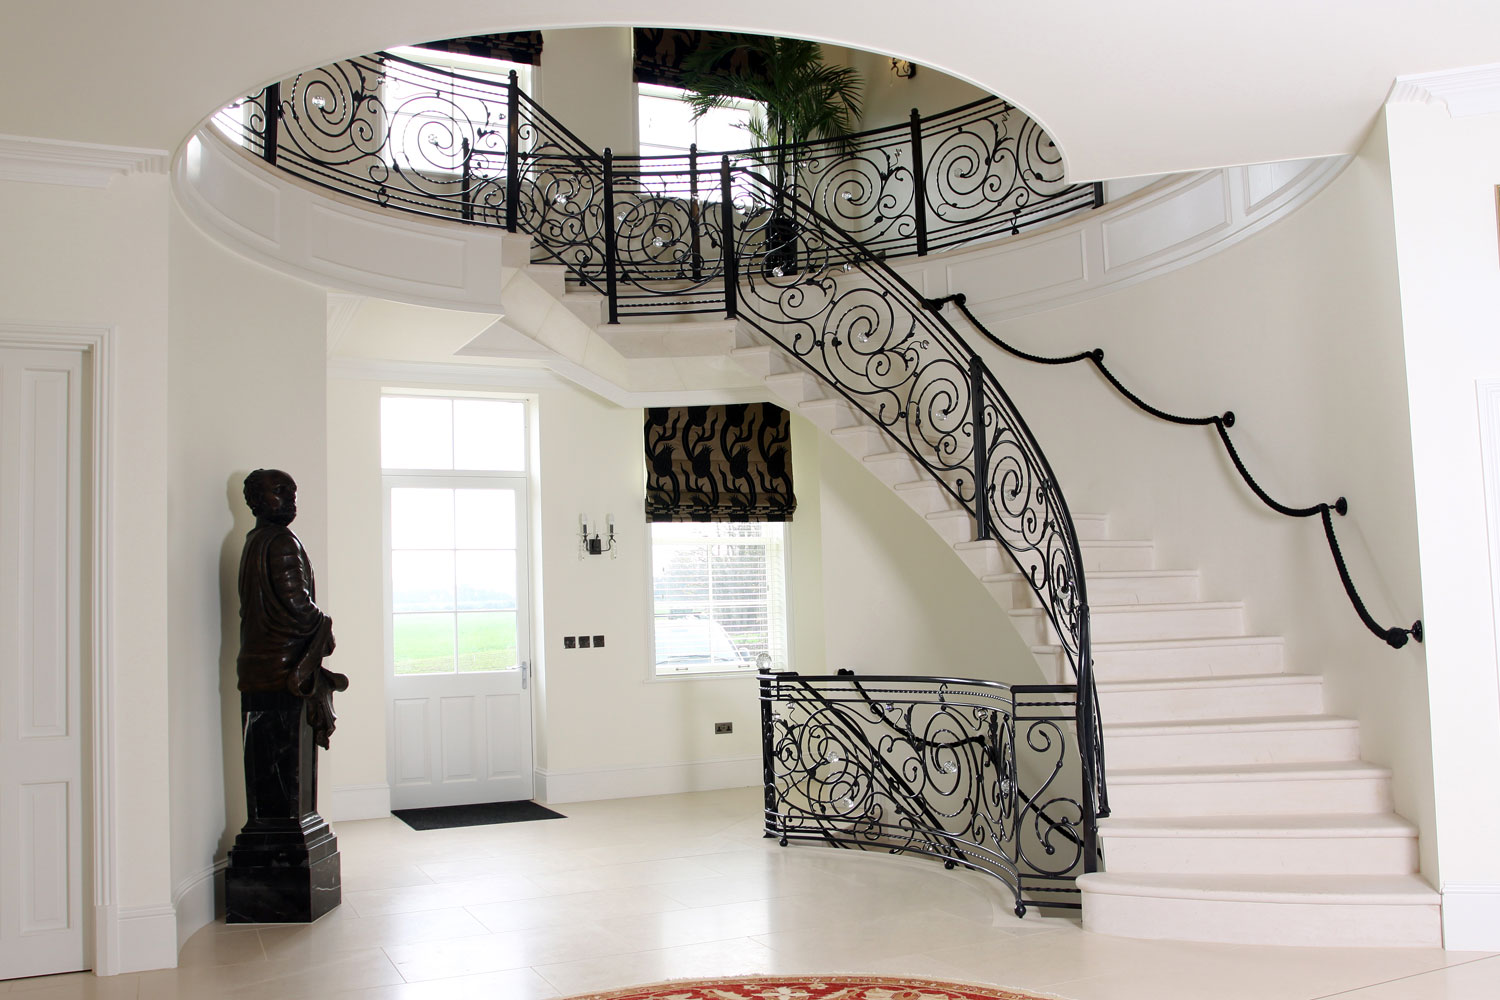 3. Moleanos stone cantilever staircase with solid stone in-flight landing – West Sussex